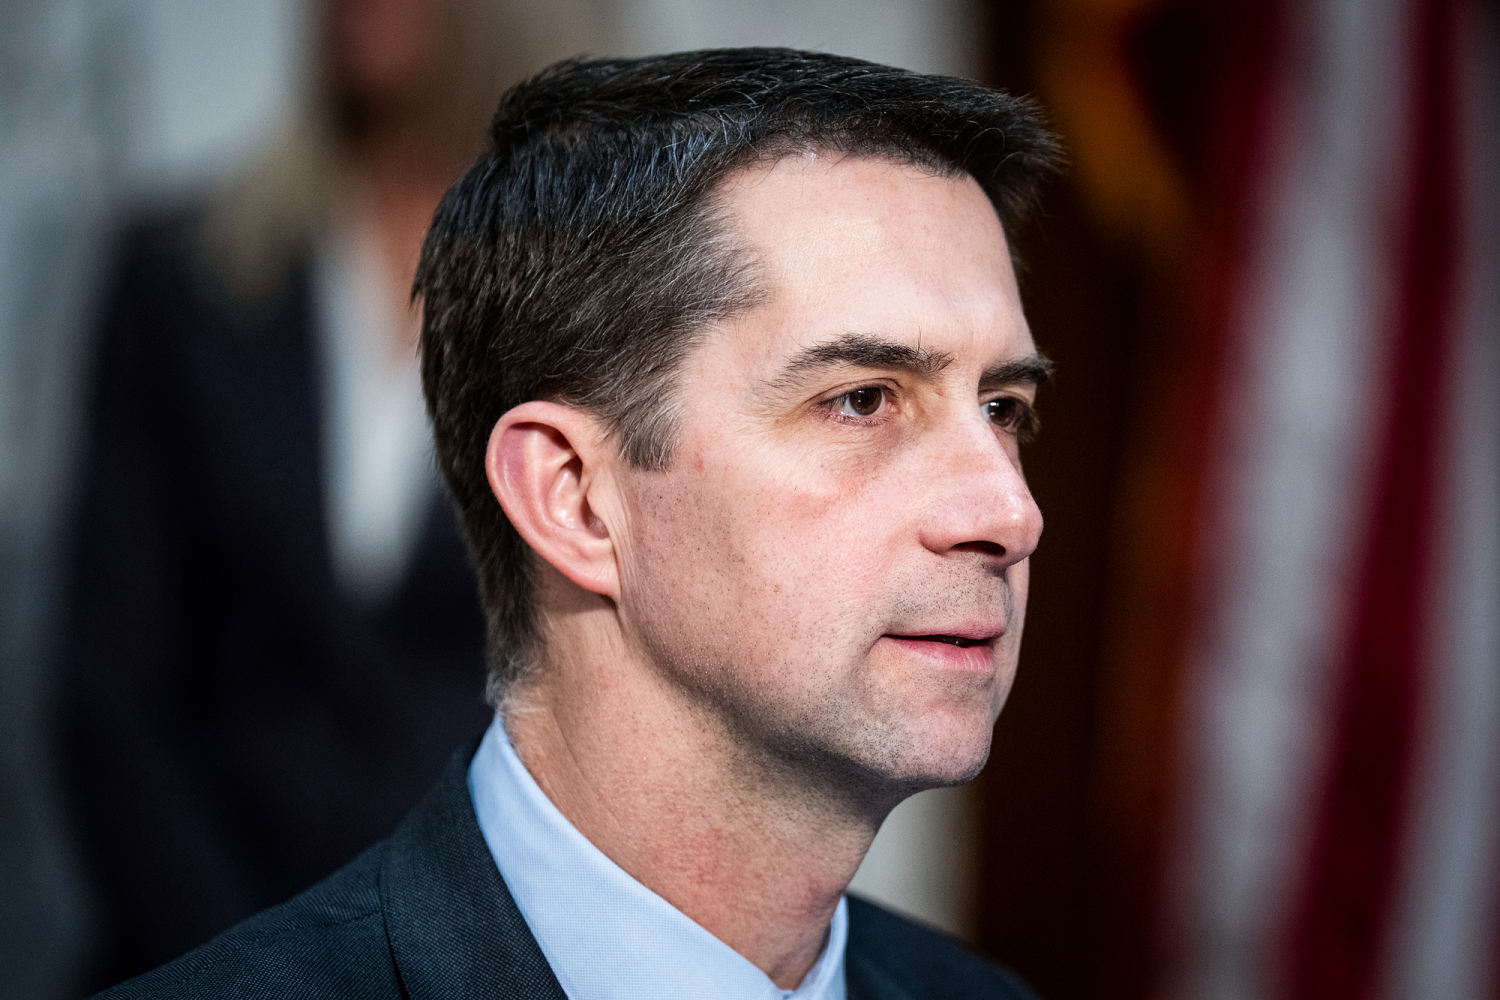 Sen. Tom Cotton doubles down on comments urging people to 'forcibly remove' protesters blocking traffic